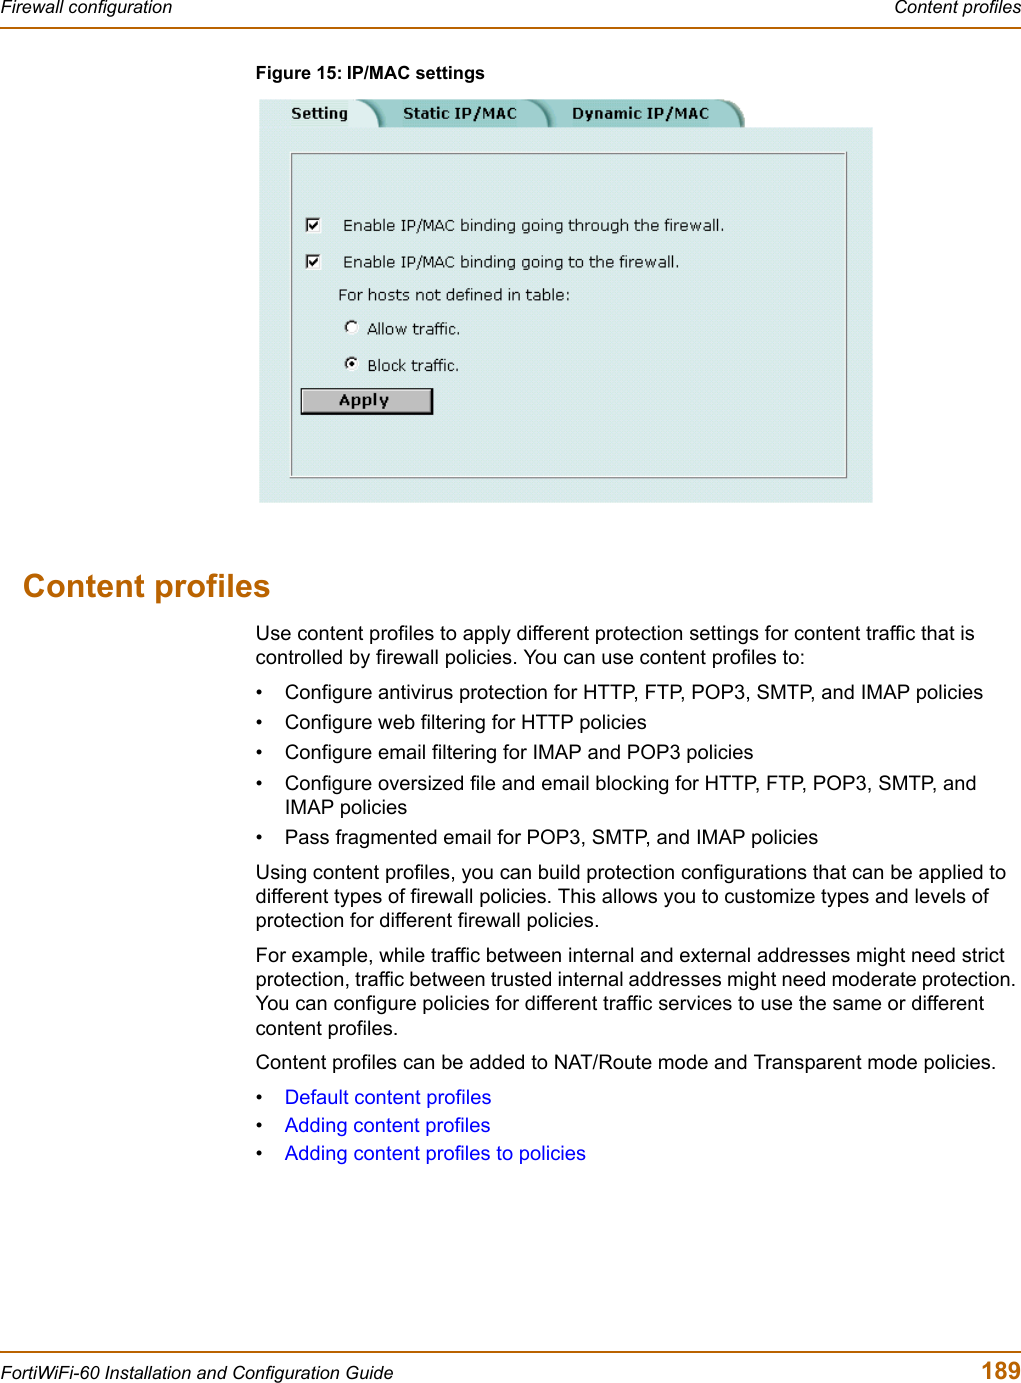 Firewall configuration  Content profilesFortiWiFi-60 Installation and Configuration Guide  189Figure 15: IP/MAC settingsContent profilesUse content profiles to apply different protection settings for content traffic that is controlled by firewall policies. You can use content profiles to:• Configure antivirus protection for HTTP, FTP, POP3, SMTP, and IMAP policies• Configure web filtering for HTTP policies• Configure email filtering for IMAP and POP3 policies• Configure oversized file and email blocking for HTTP, FTP, POP3, SMTP, and IMAP policies• Pass fragmented email for POP3, SMTP, and IMAP policiesUsing content profiles, you can build protection configurations that can be applied to different types of firewall policies. This allows you to customize types and levels of protection for different firewall policies.For example, while traffic between internal and external addresses might need strict protection, traffic between trusted internal addresses might need moderate protection. You can configure policies for different traffic services to use the same or different content profiles.Content profiles can be added to NAT/Route mode and Transparent mode policies.•Default content profiles•Adding content profiles•Adding content profiles to policies